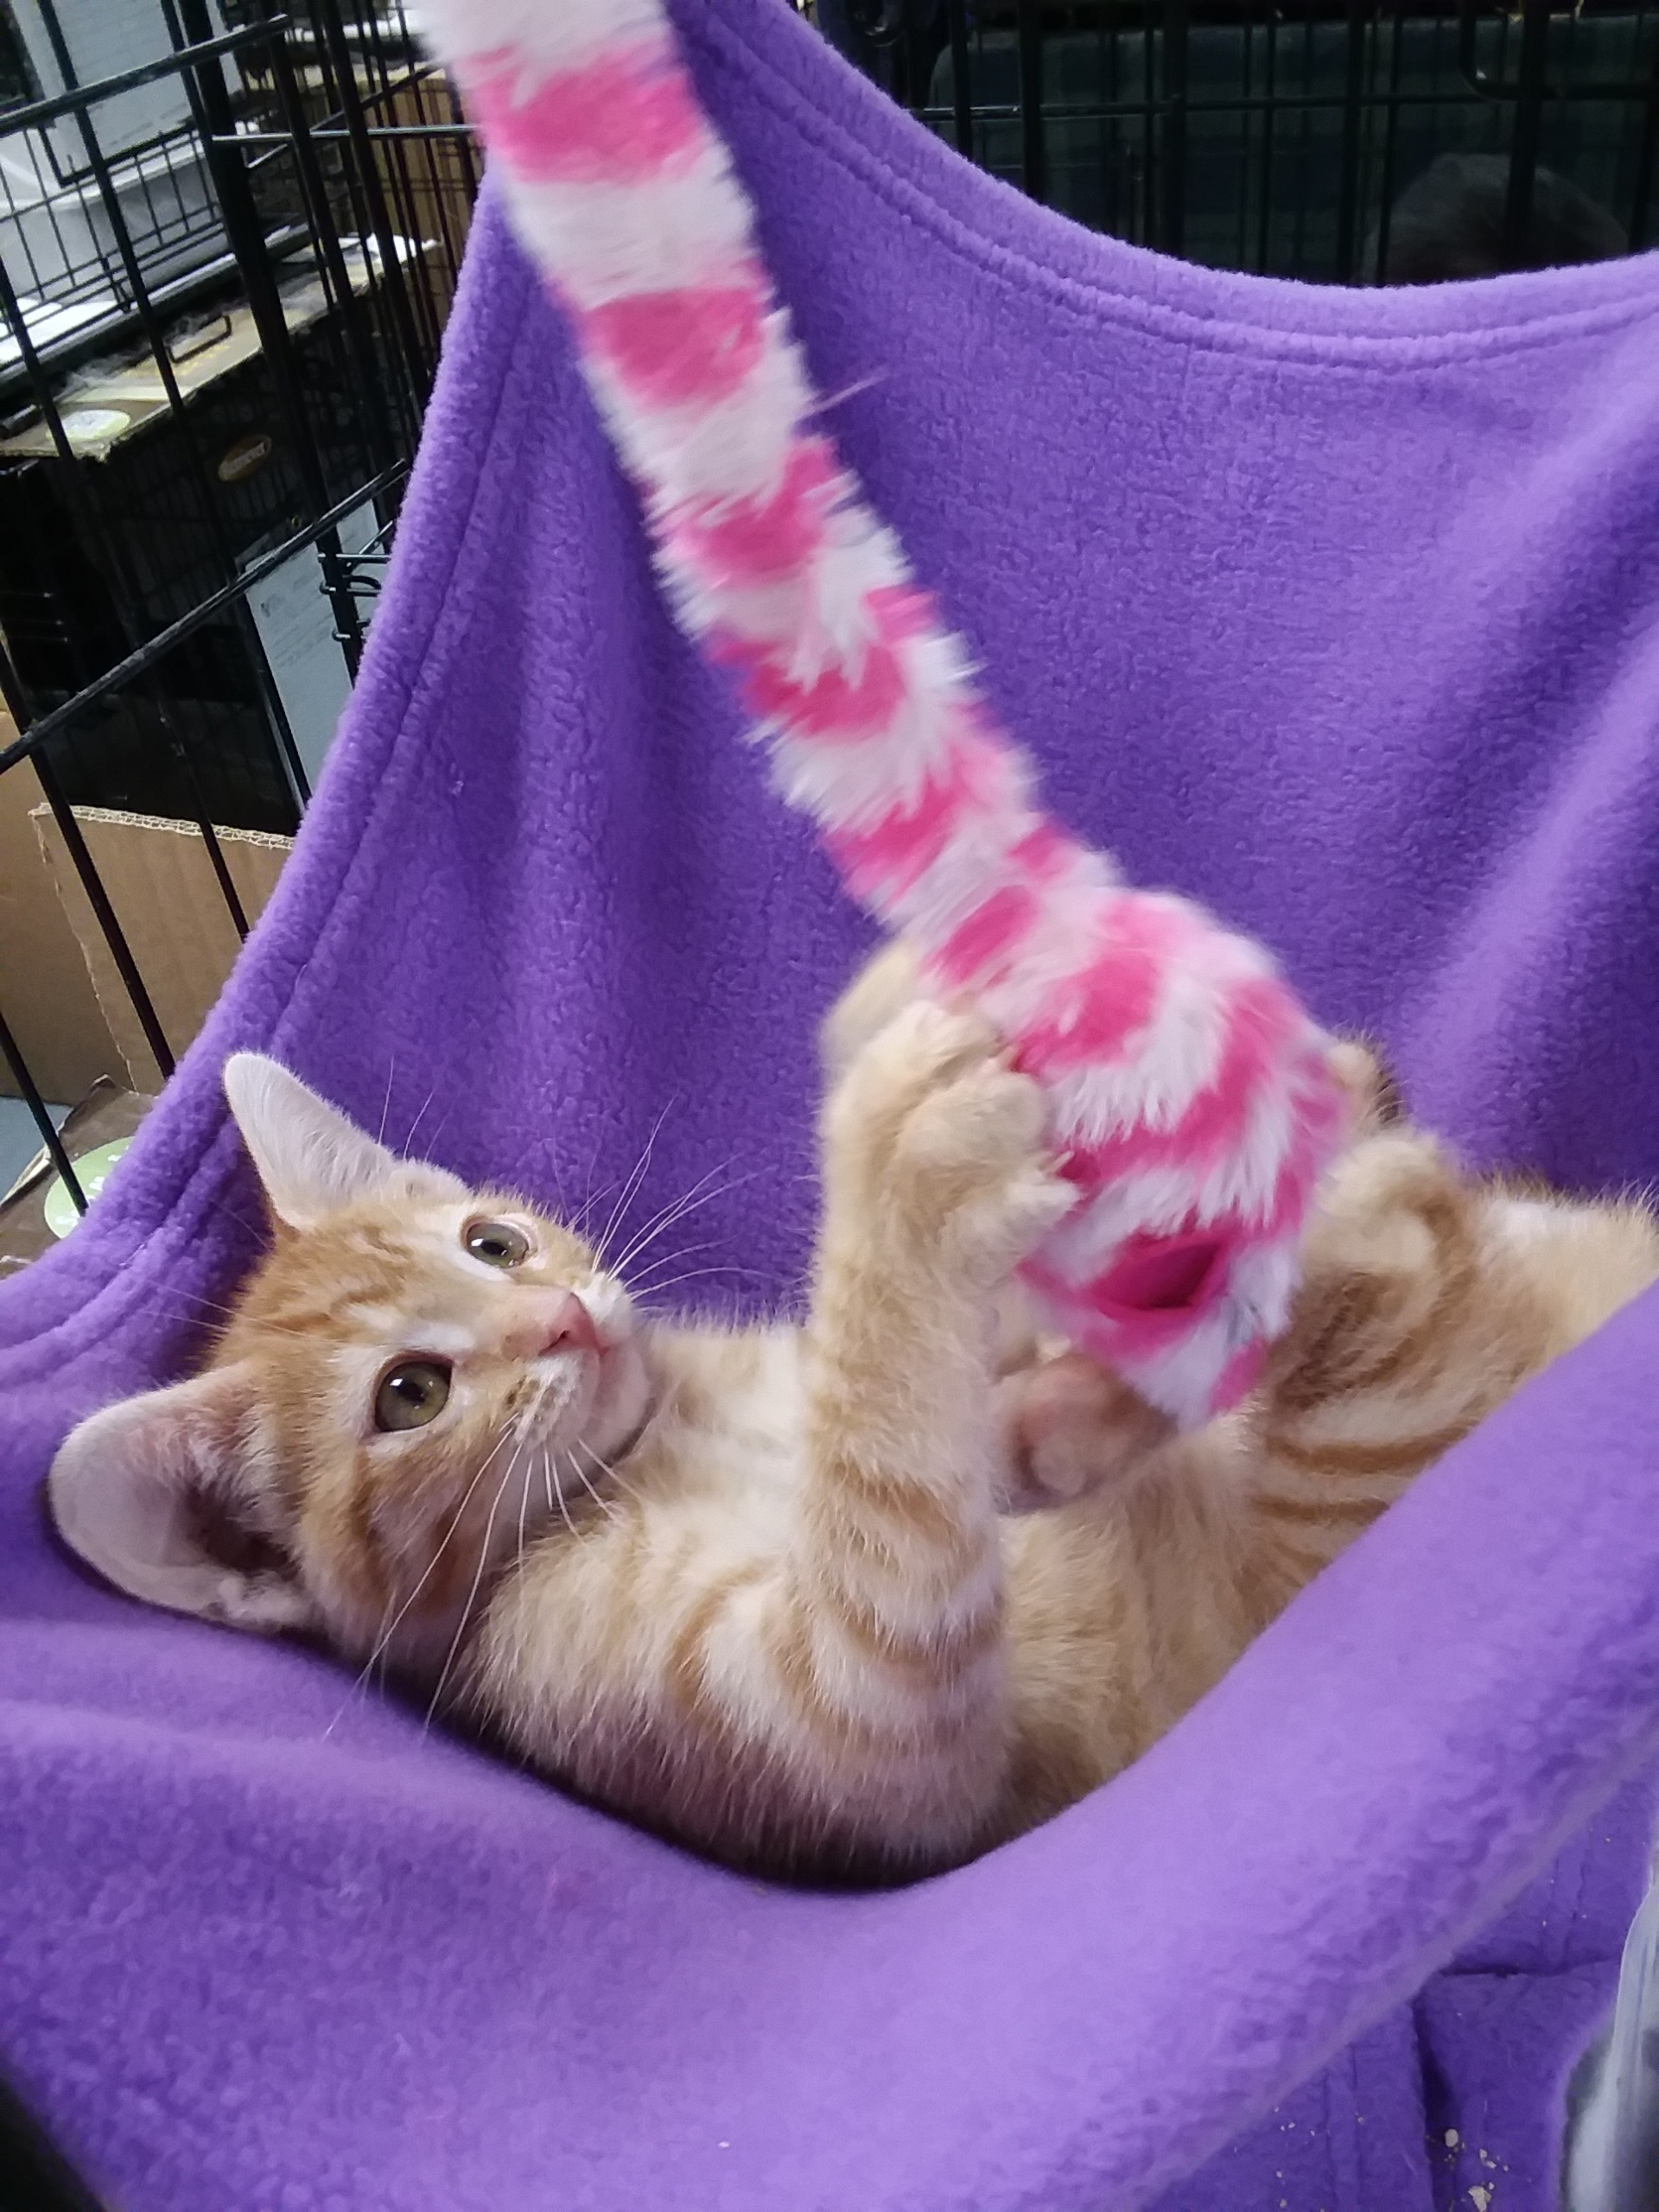 Orange tabby kitten playing with toy